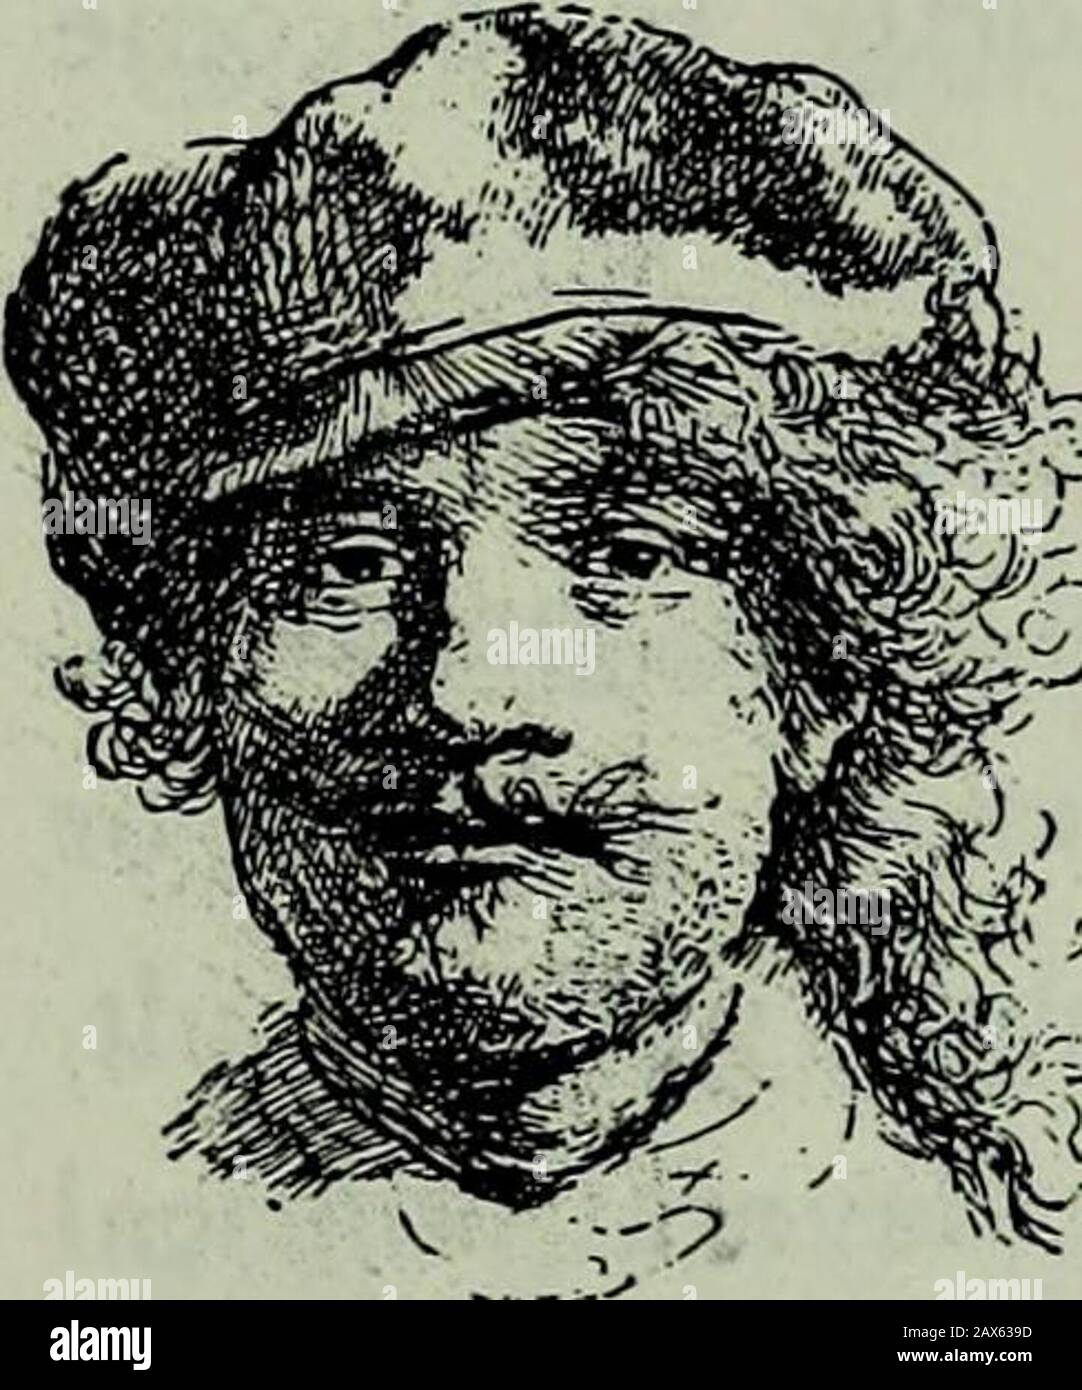 rembrandt drawing